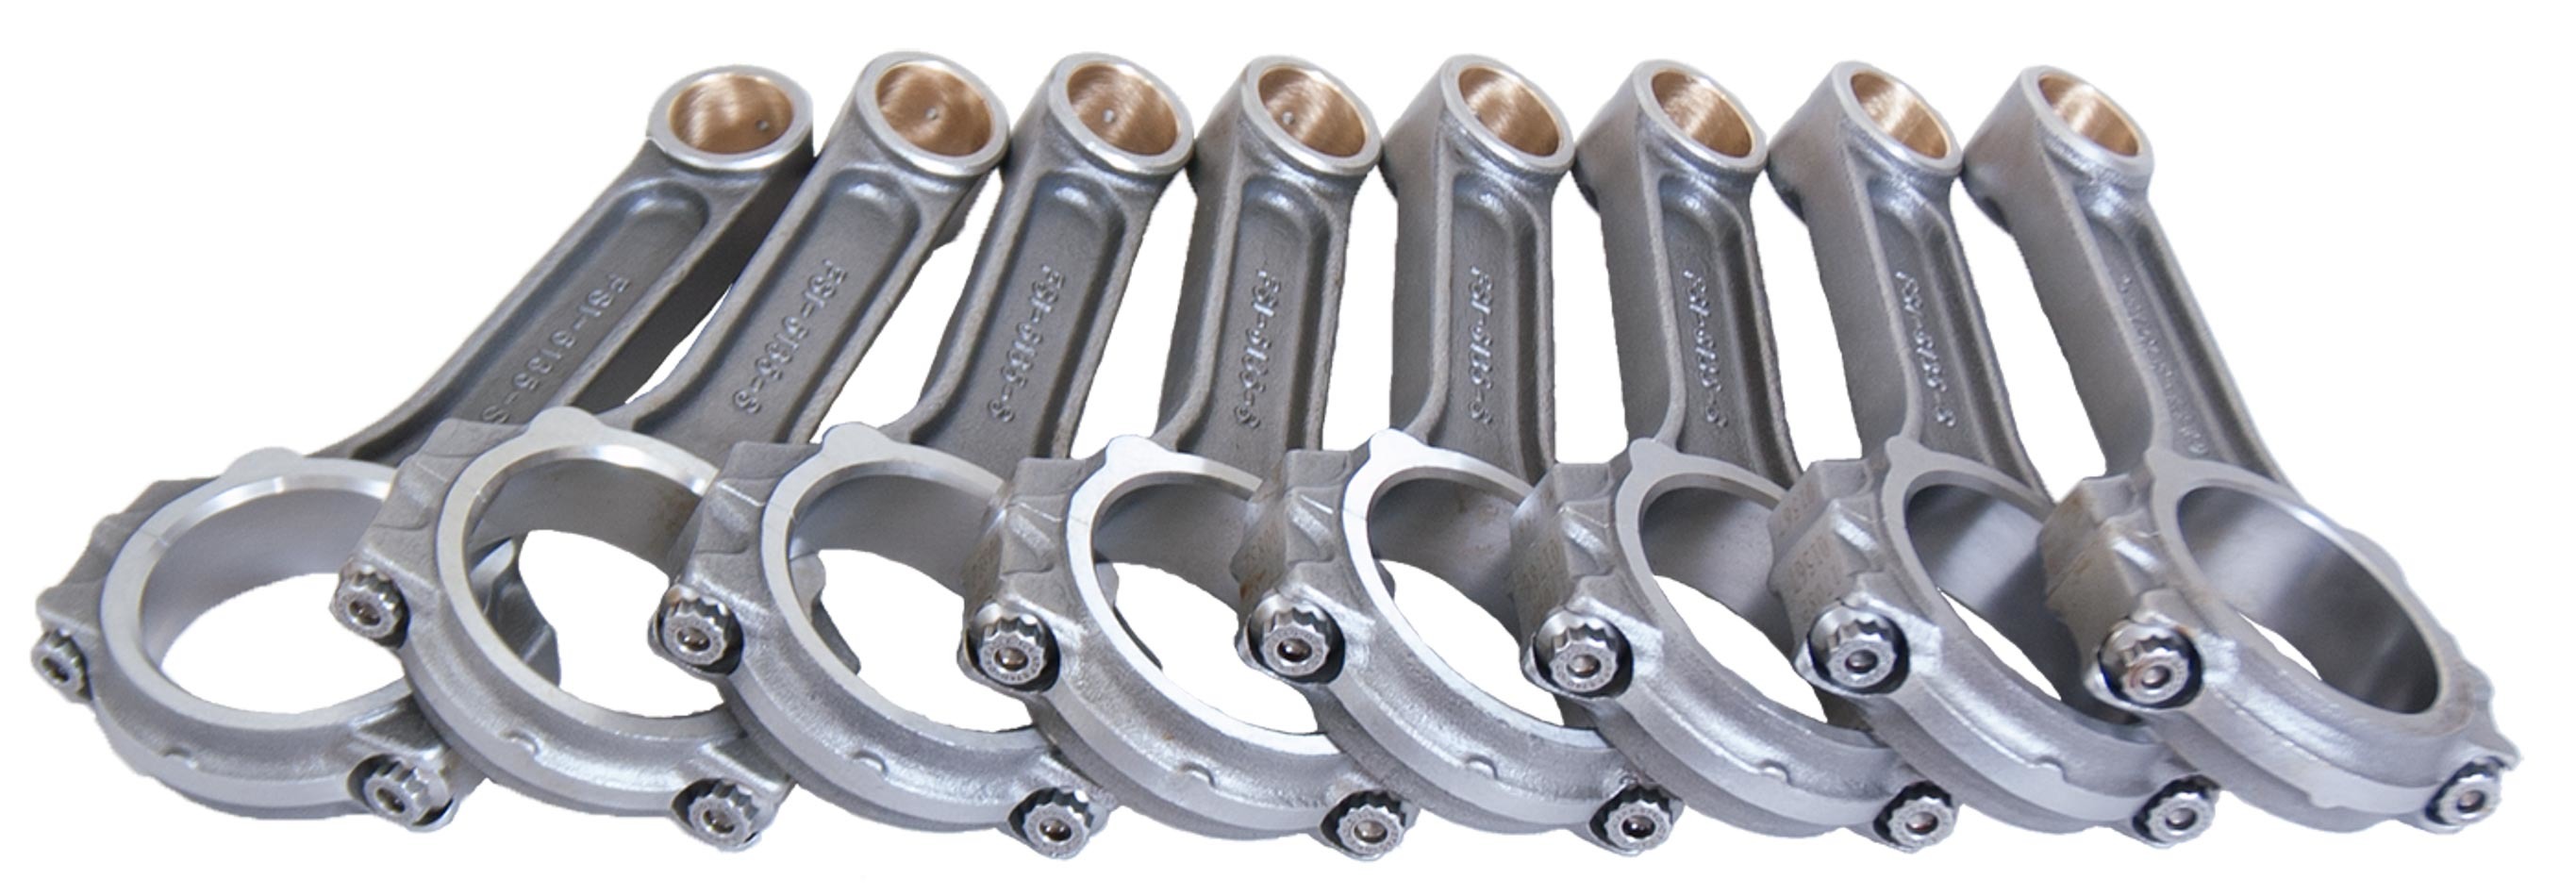 Eagle FSI6135 - Connecting Rod, I Beam, 6.135 in Long, Bushed, 7/16 in Cap Screws, Forged Steel, Big Block Chevy, Each